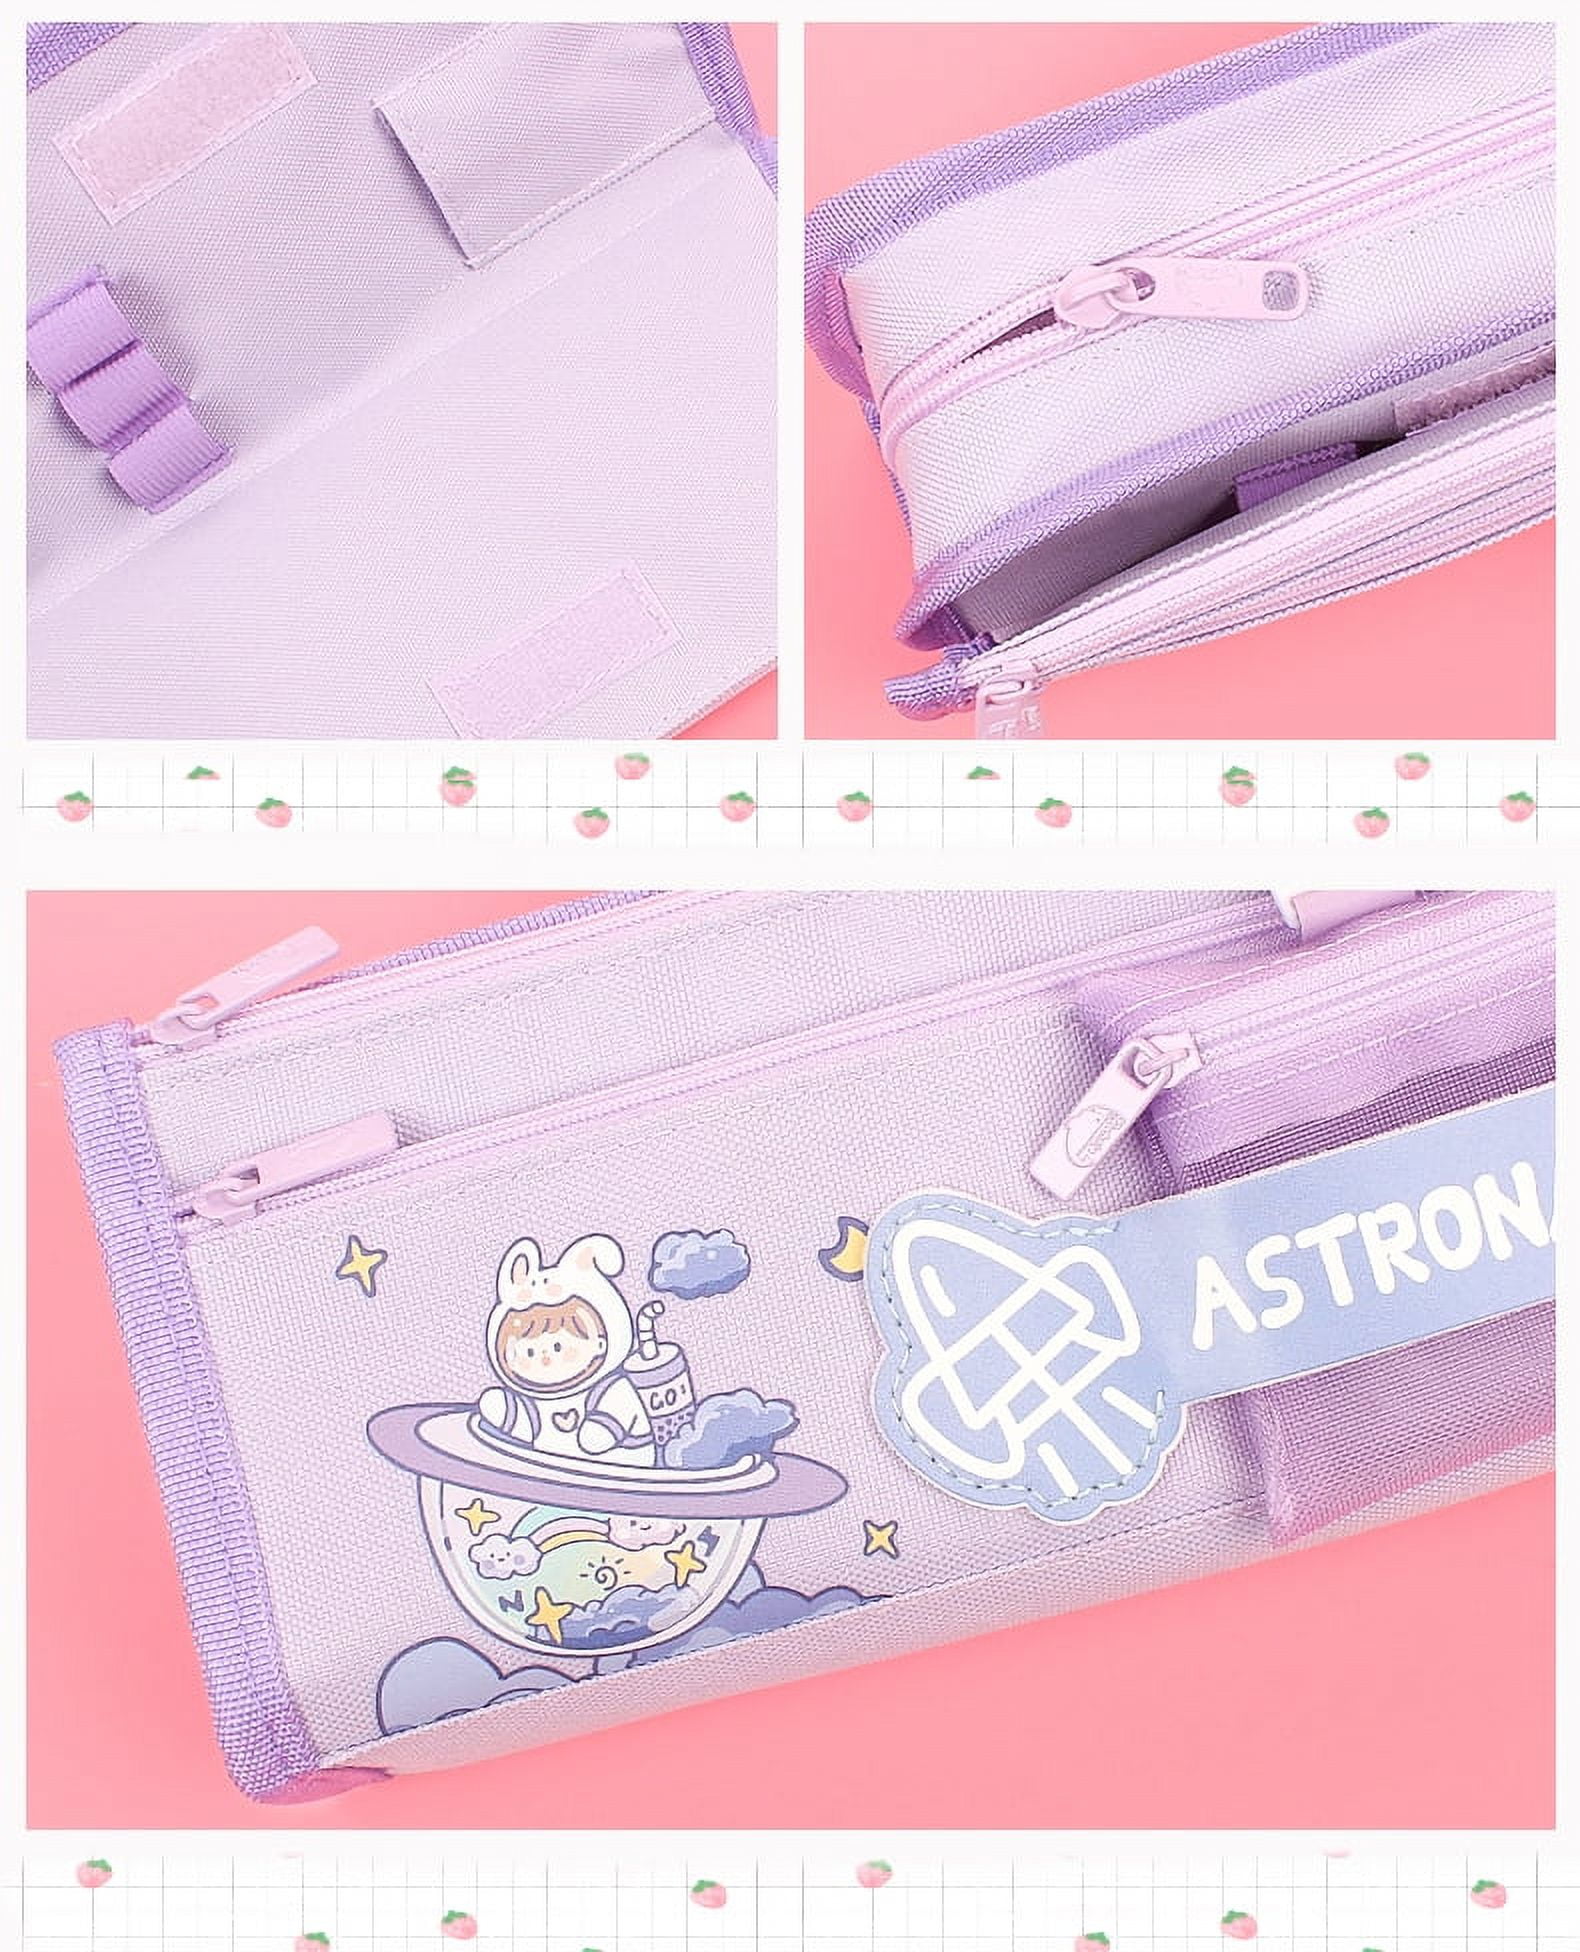 svlftecon Kawaii Pencil Case for Girls Boys Comes with 6 Free Pens Canvas Office Stationery Bag Organizer Pouch Portable Pencil Bag, Pink